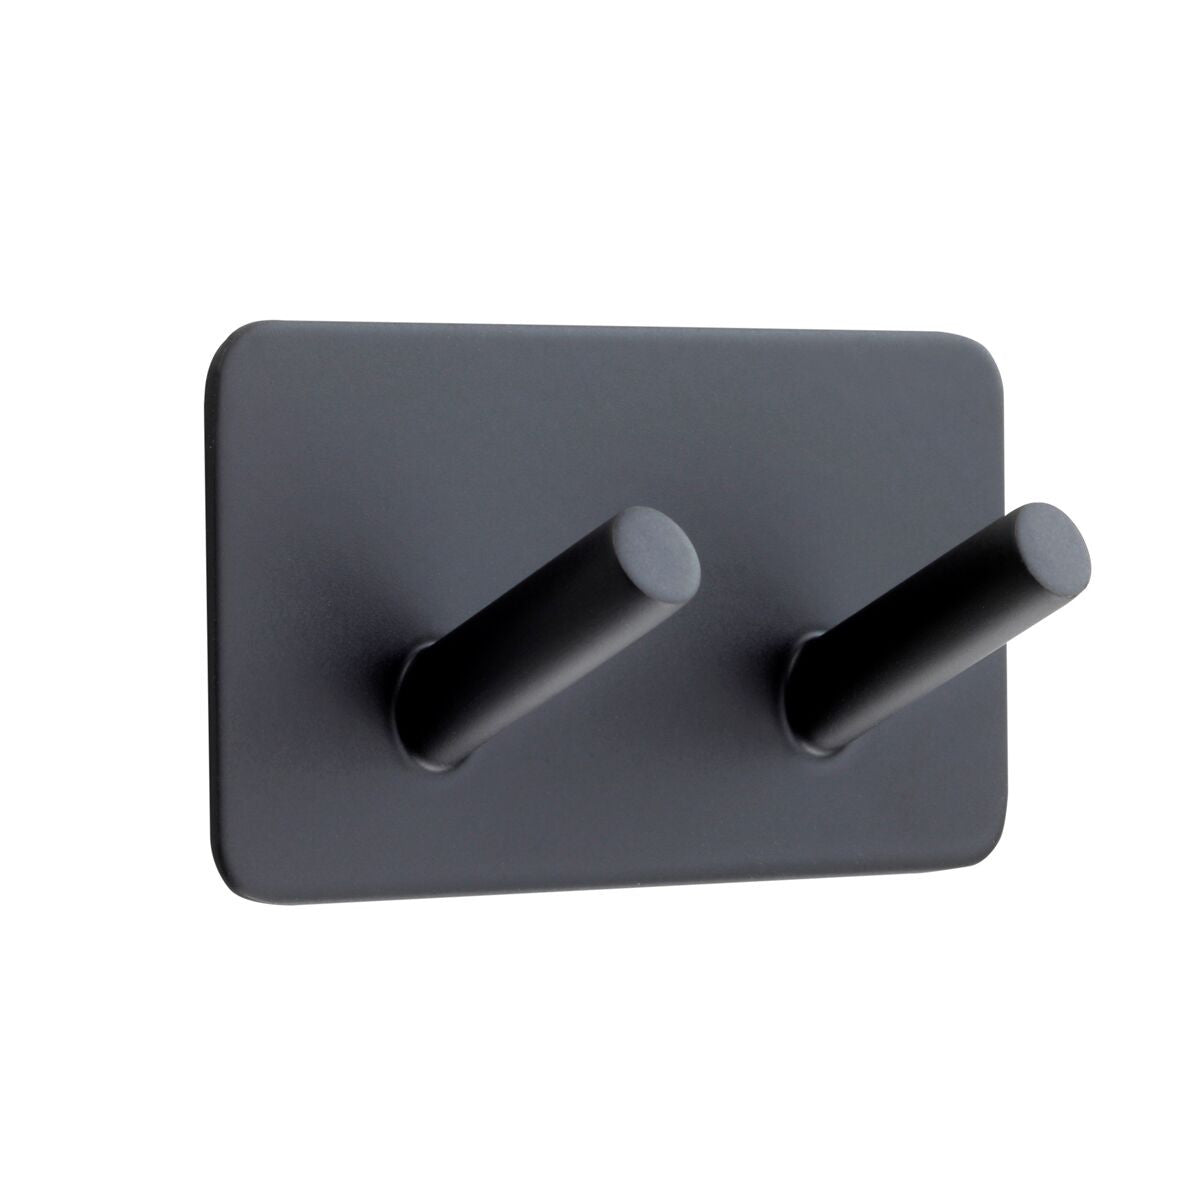 Matt Black Double Hat and Coat Hook on Adhesive Backplate